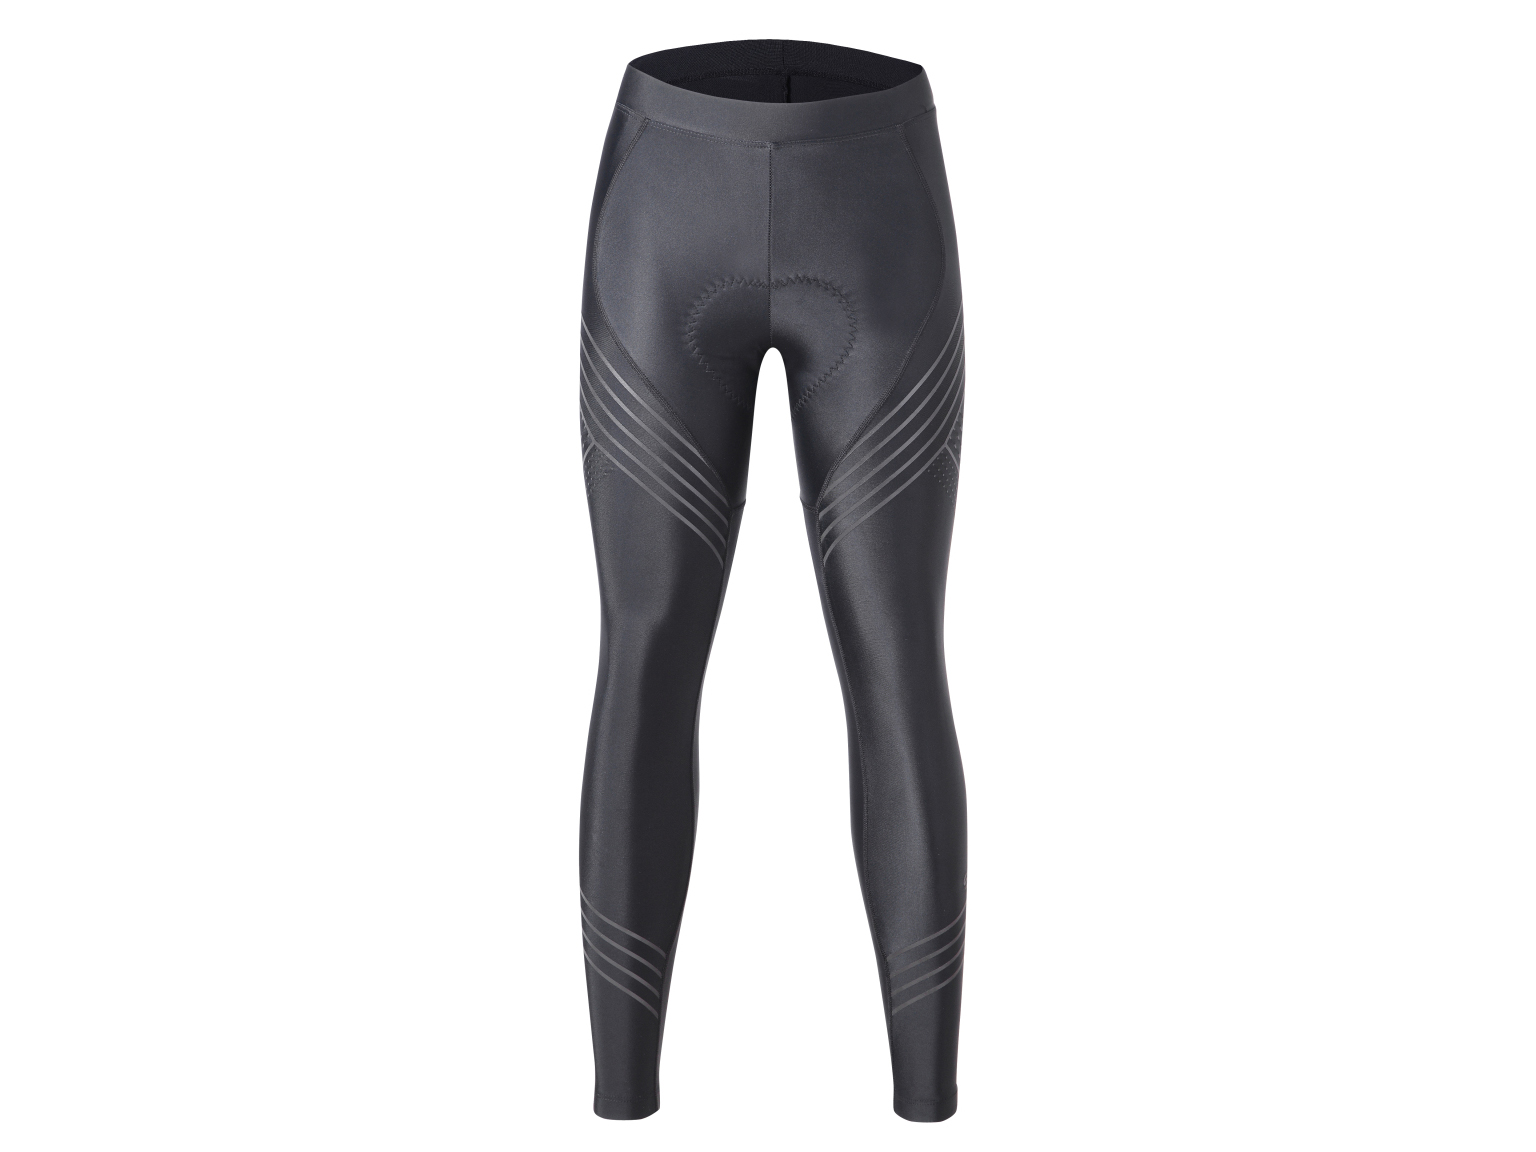 Lady’s knitted bicycle pant with pad